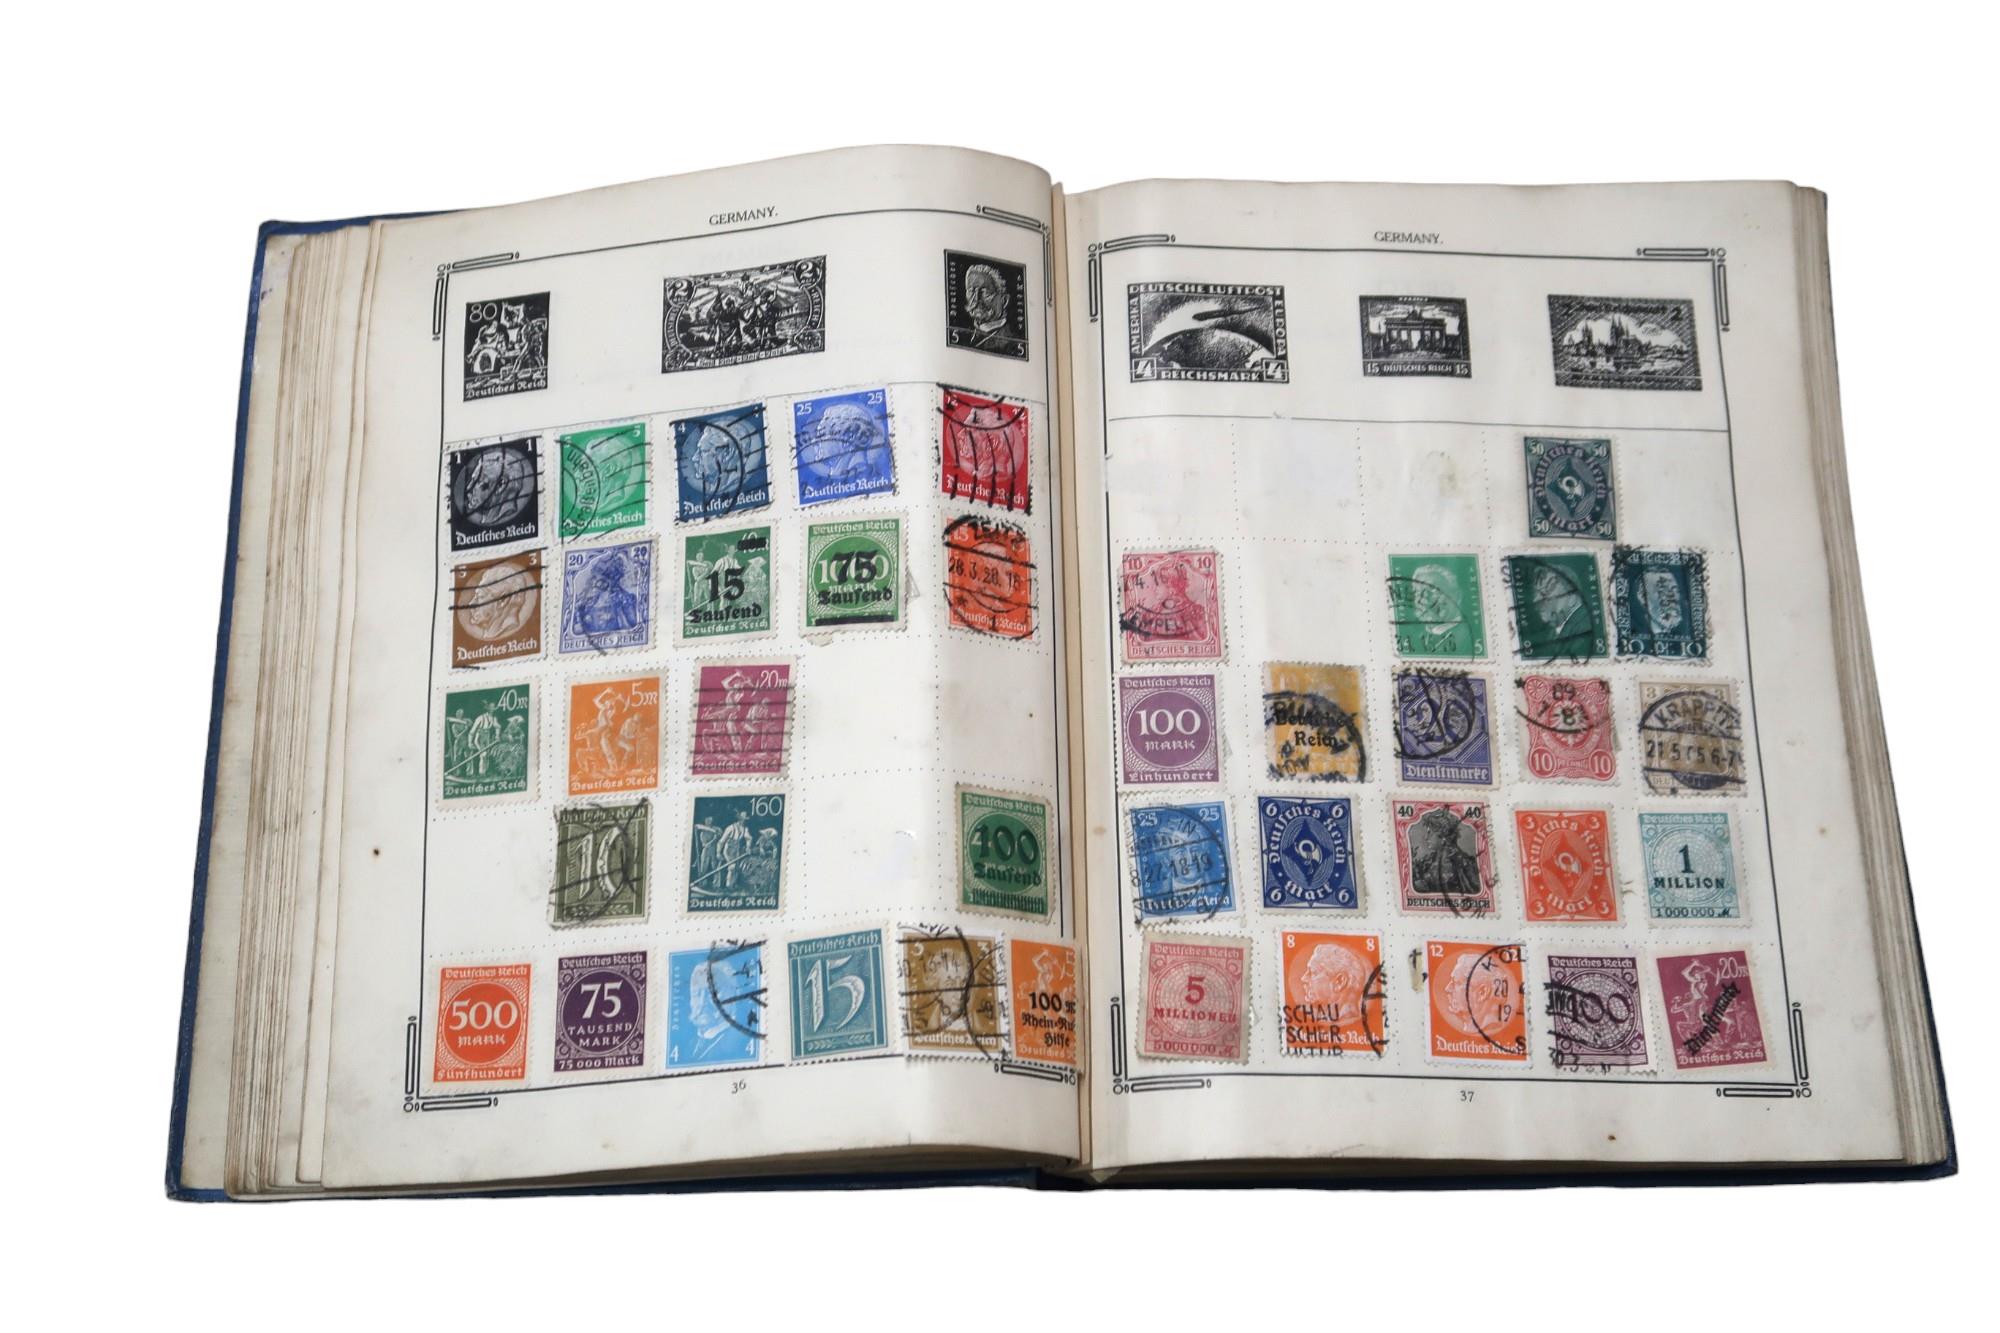 Stanley Gibbons The Improved Stamp Album to include Great Britain 1/d red, 1/d lilac, Victoria 1/ - Image 18 of 20